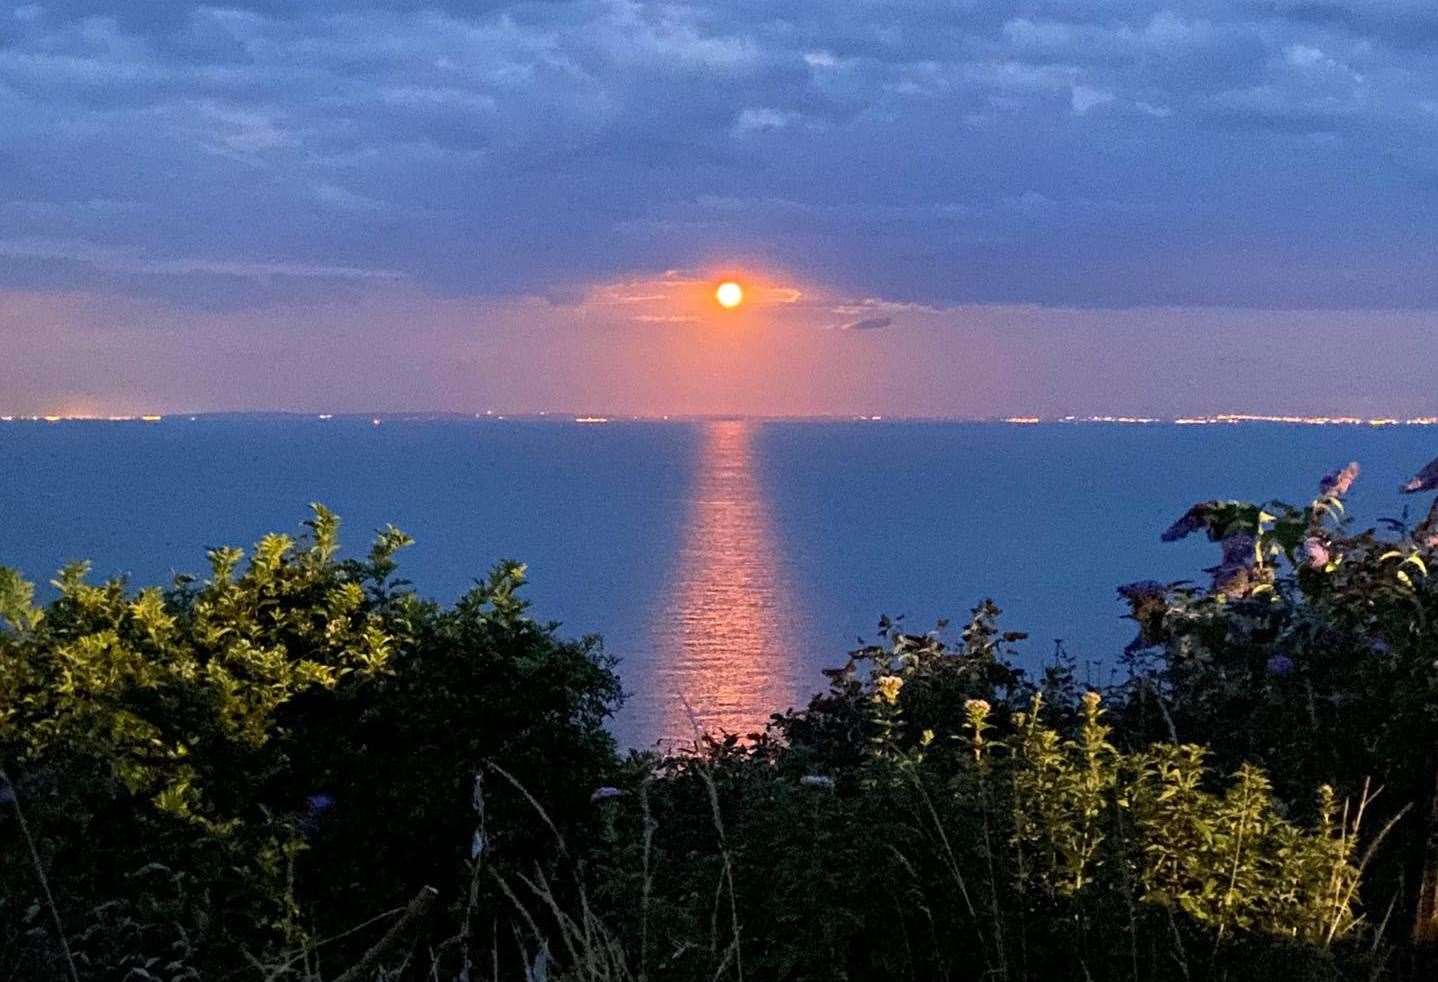 The view from Little Switzerland camp site in Folkestone